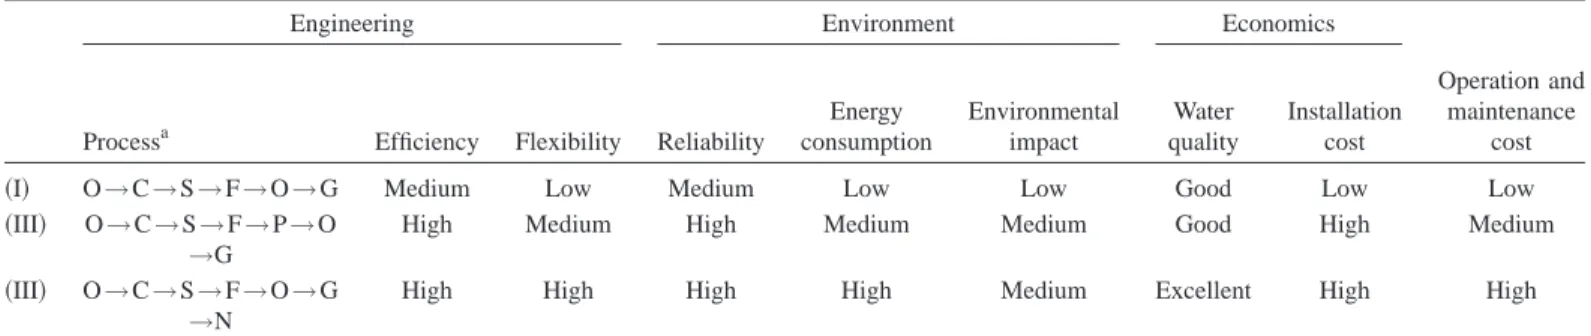 Table 11. Overall Performance Evaluation of the Selected Processes from the Aspect of Engineering, Environment, and Economy